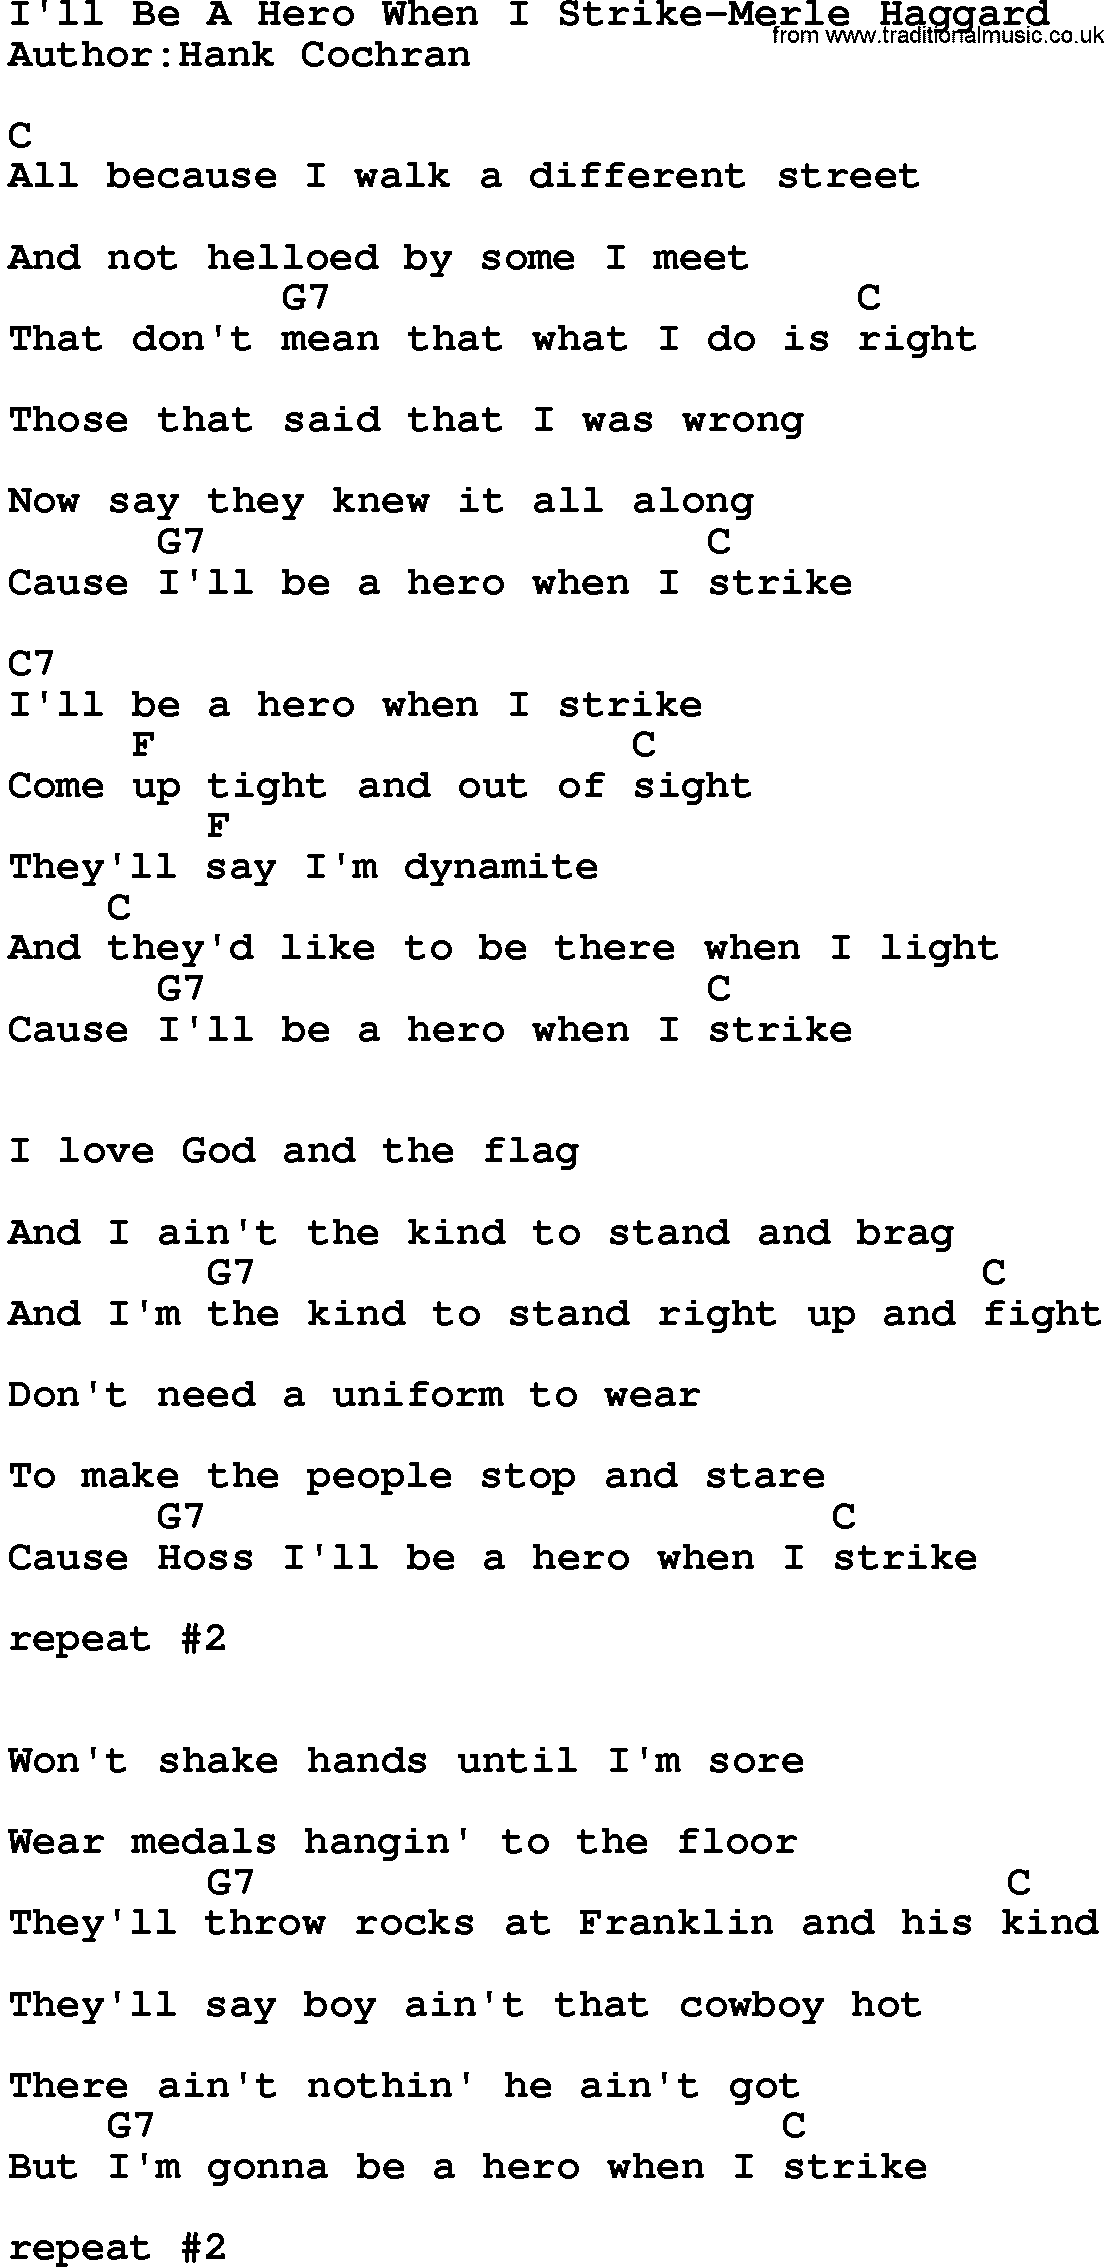 Country music song: I'll Be A Hero When I Strike-Merle Haggard lyrics and chords